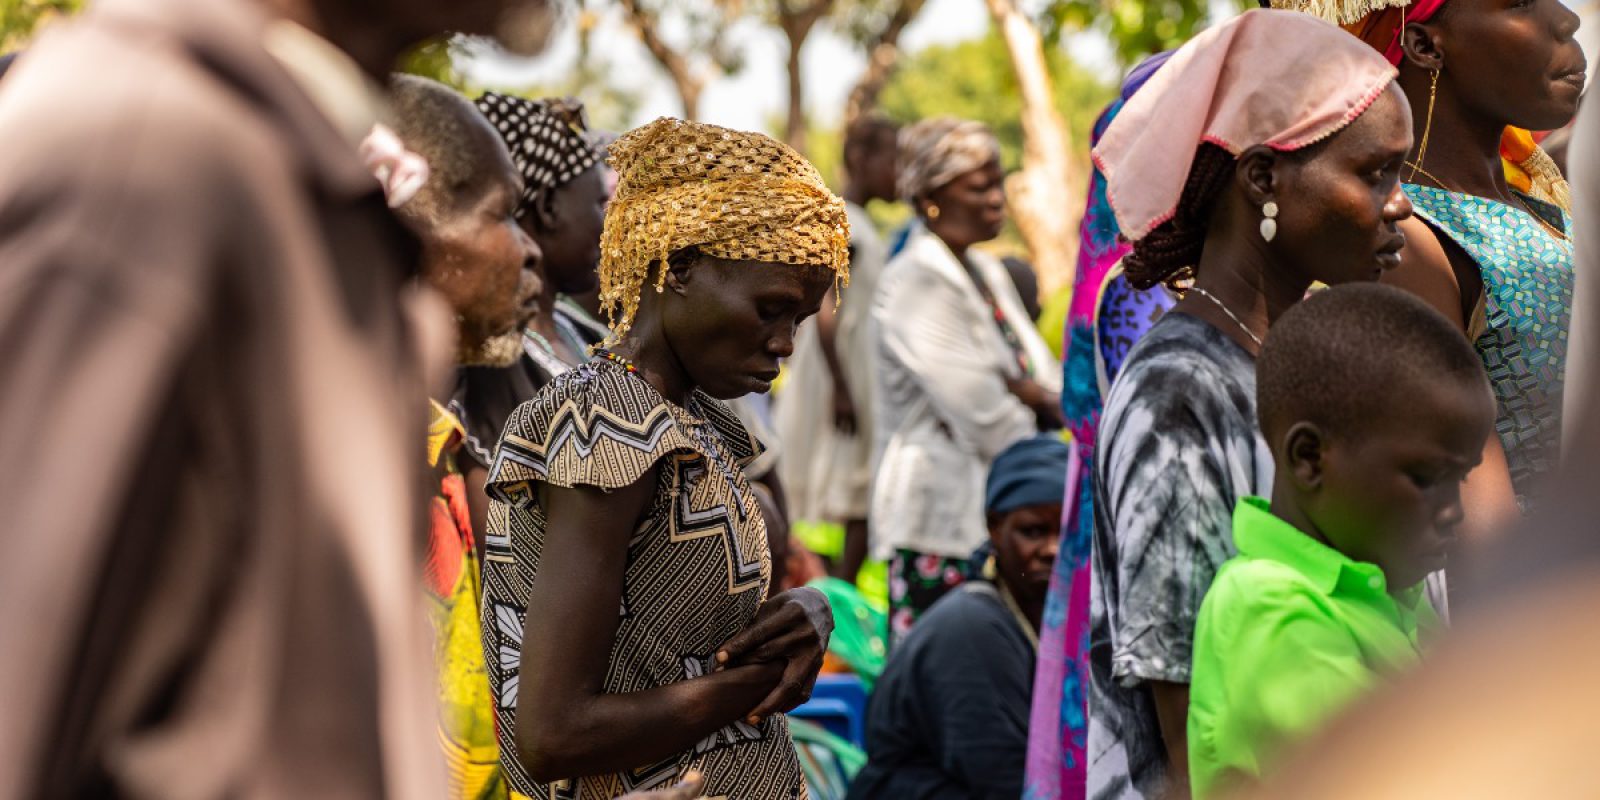 On this Holy Easter, JRS Easter greetings celebrate the spirit of resurrection among the people we accompany. A woman praying during a mass celebrated in Uganda (Jesuit Refugee Service).